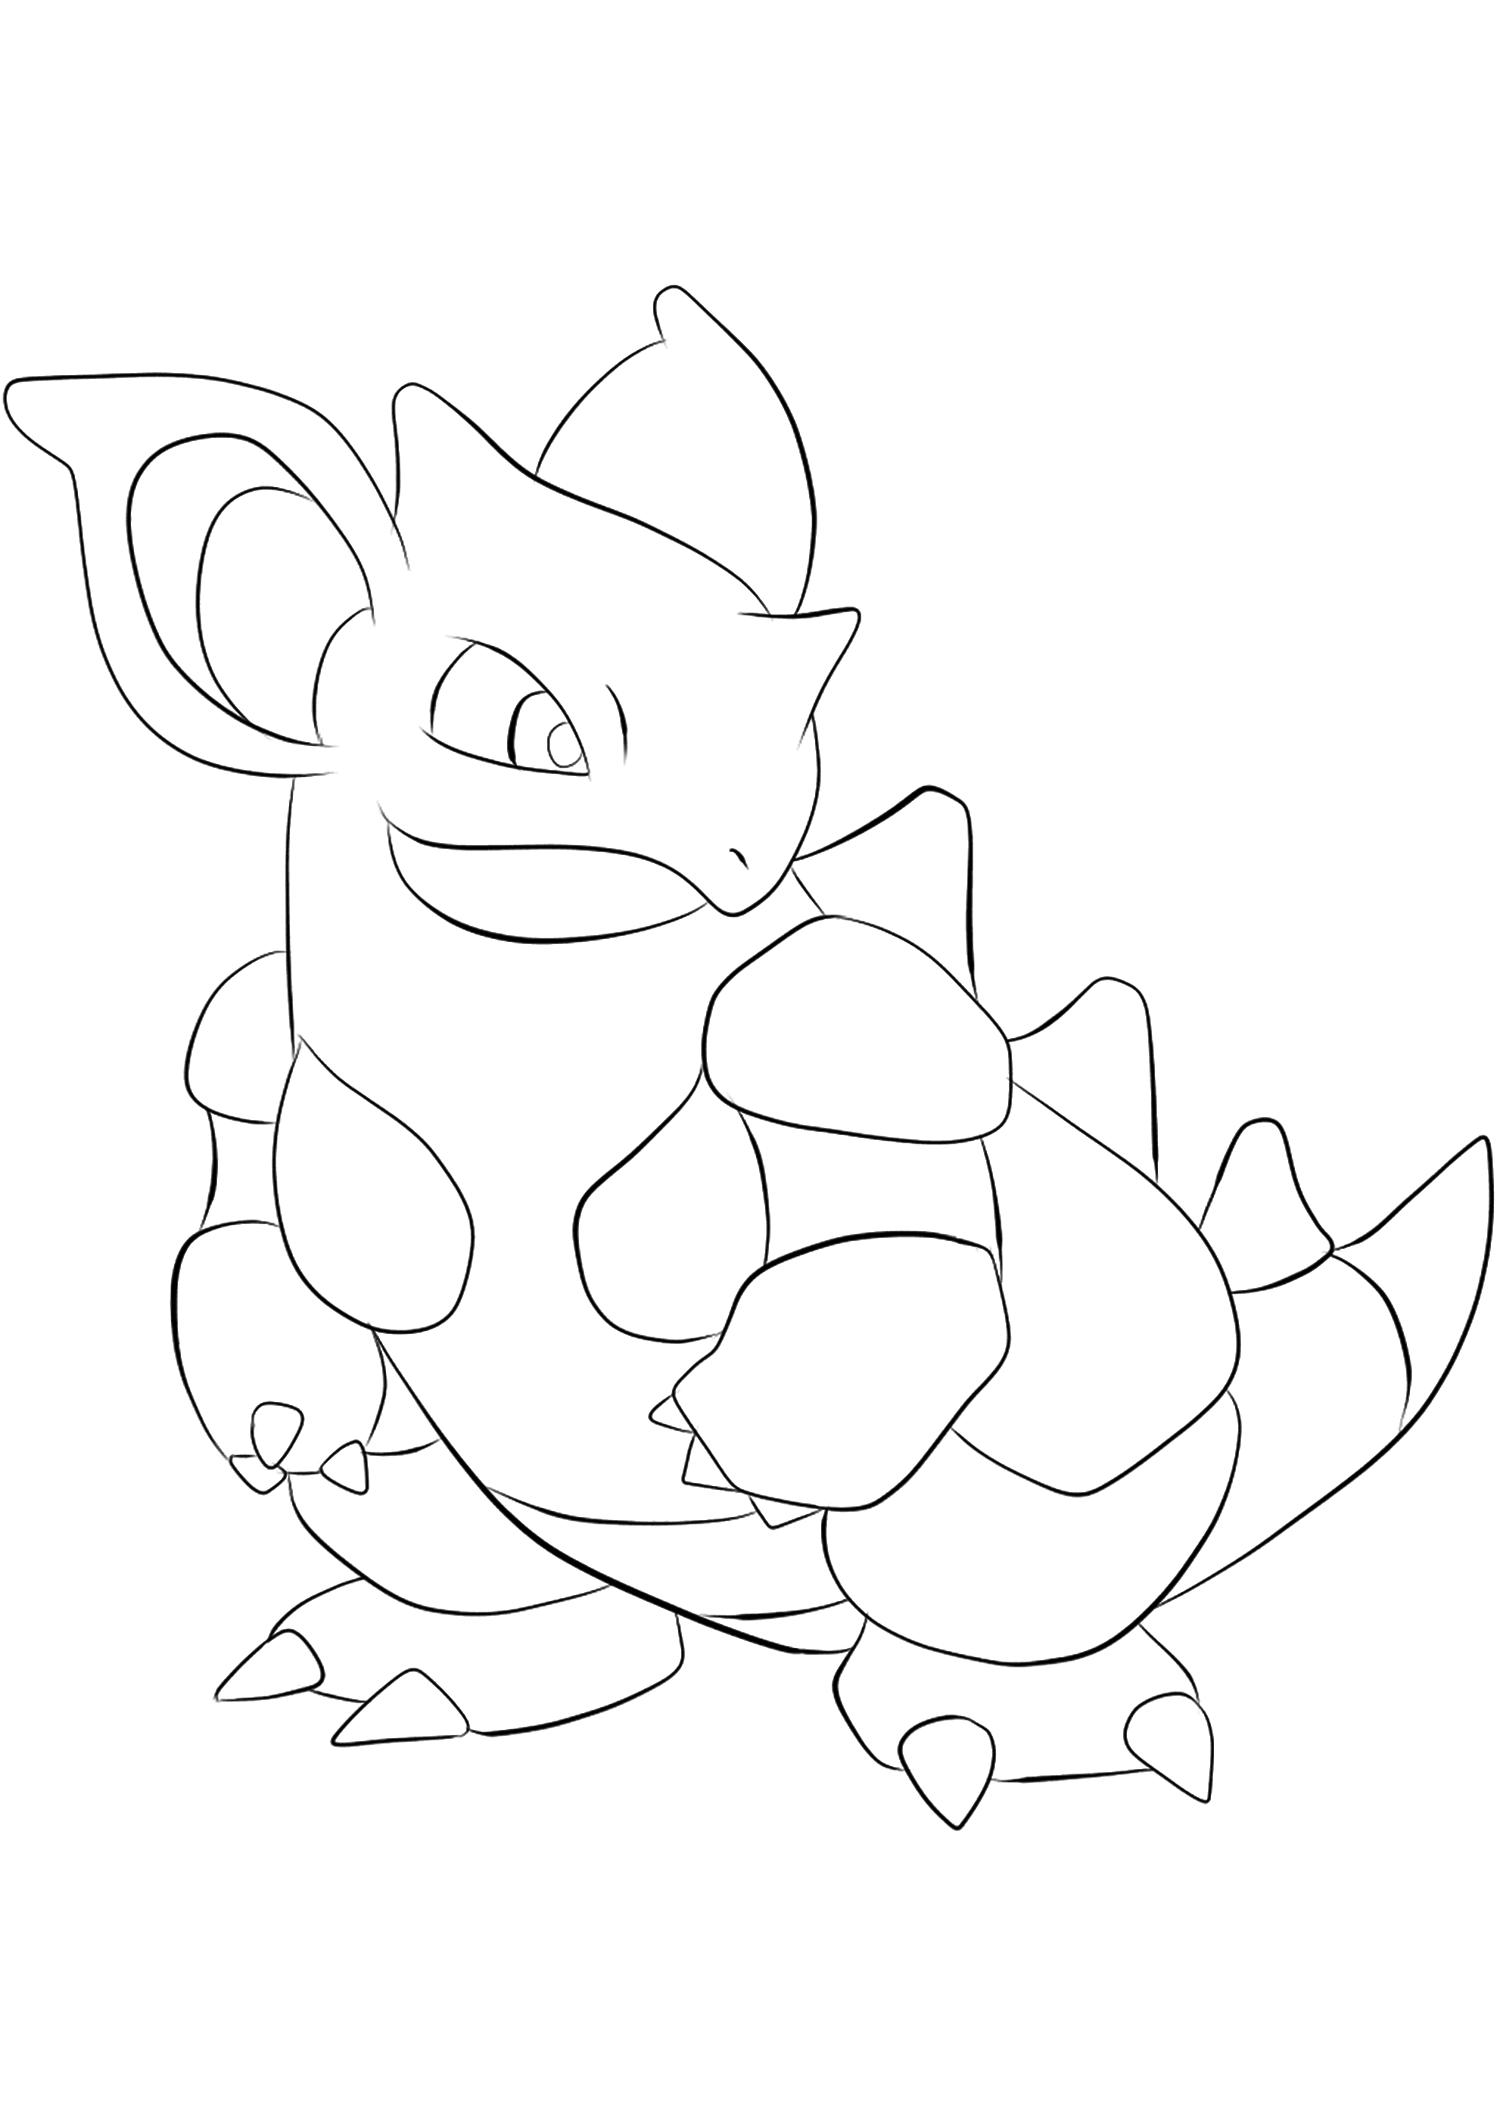 Nidoqueen (No.31). Nidoqueen Coloring page, Generation I Pokemon of type Poison and GroundOriginal image credit: Pokemon linearts by Lilly Gerbil'font-size:smaller;color:gray'>Permission: All rights reserved © Pokemon company and Ken Sugimori.